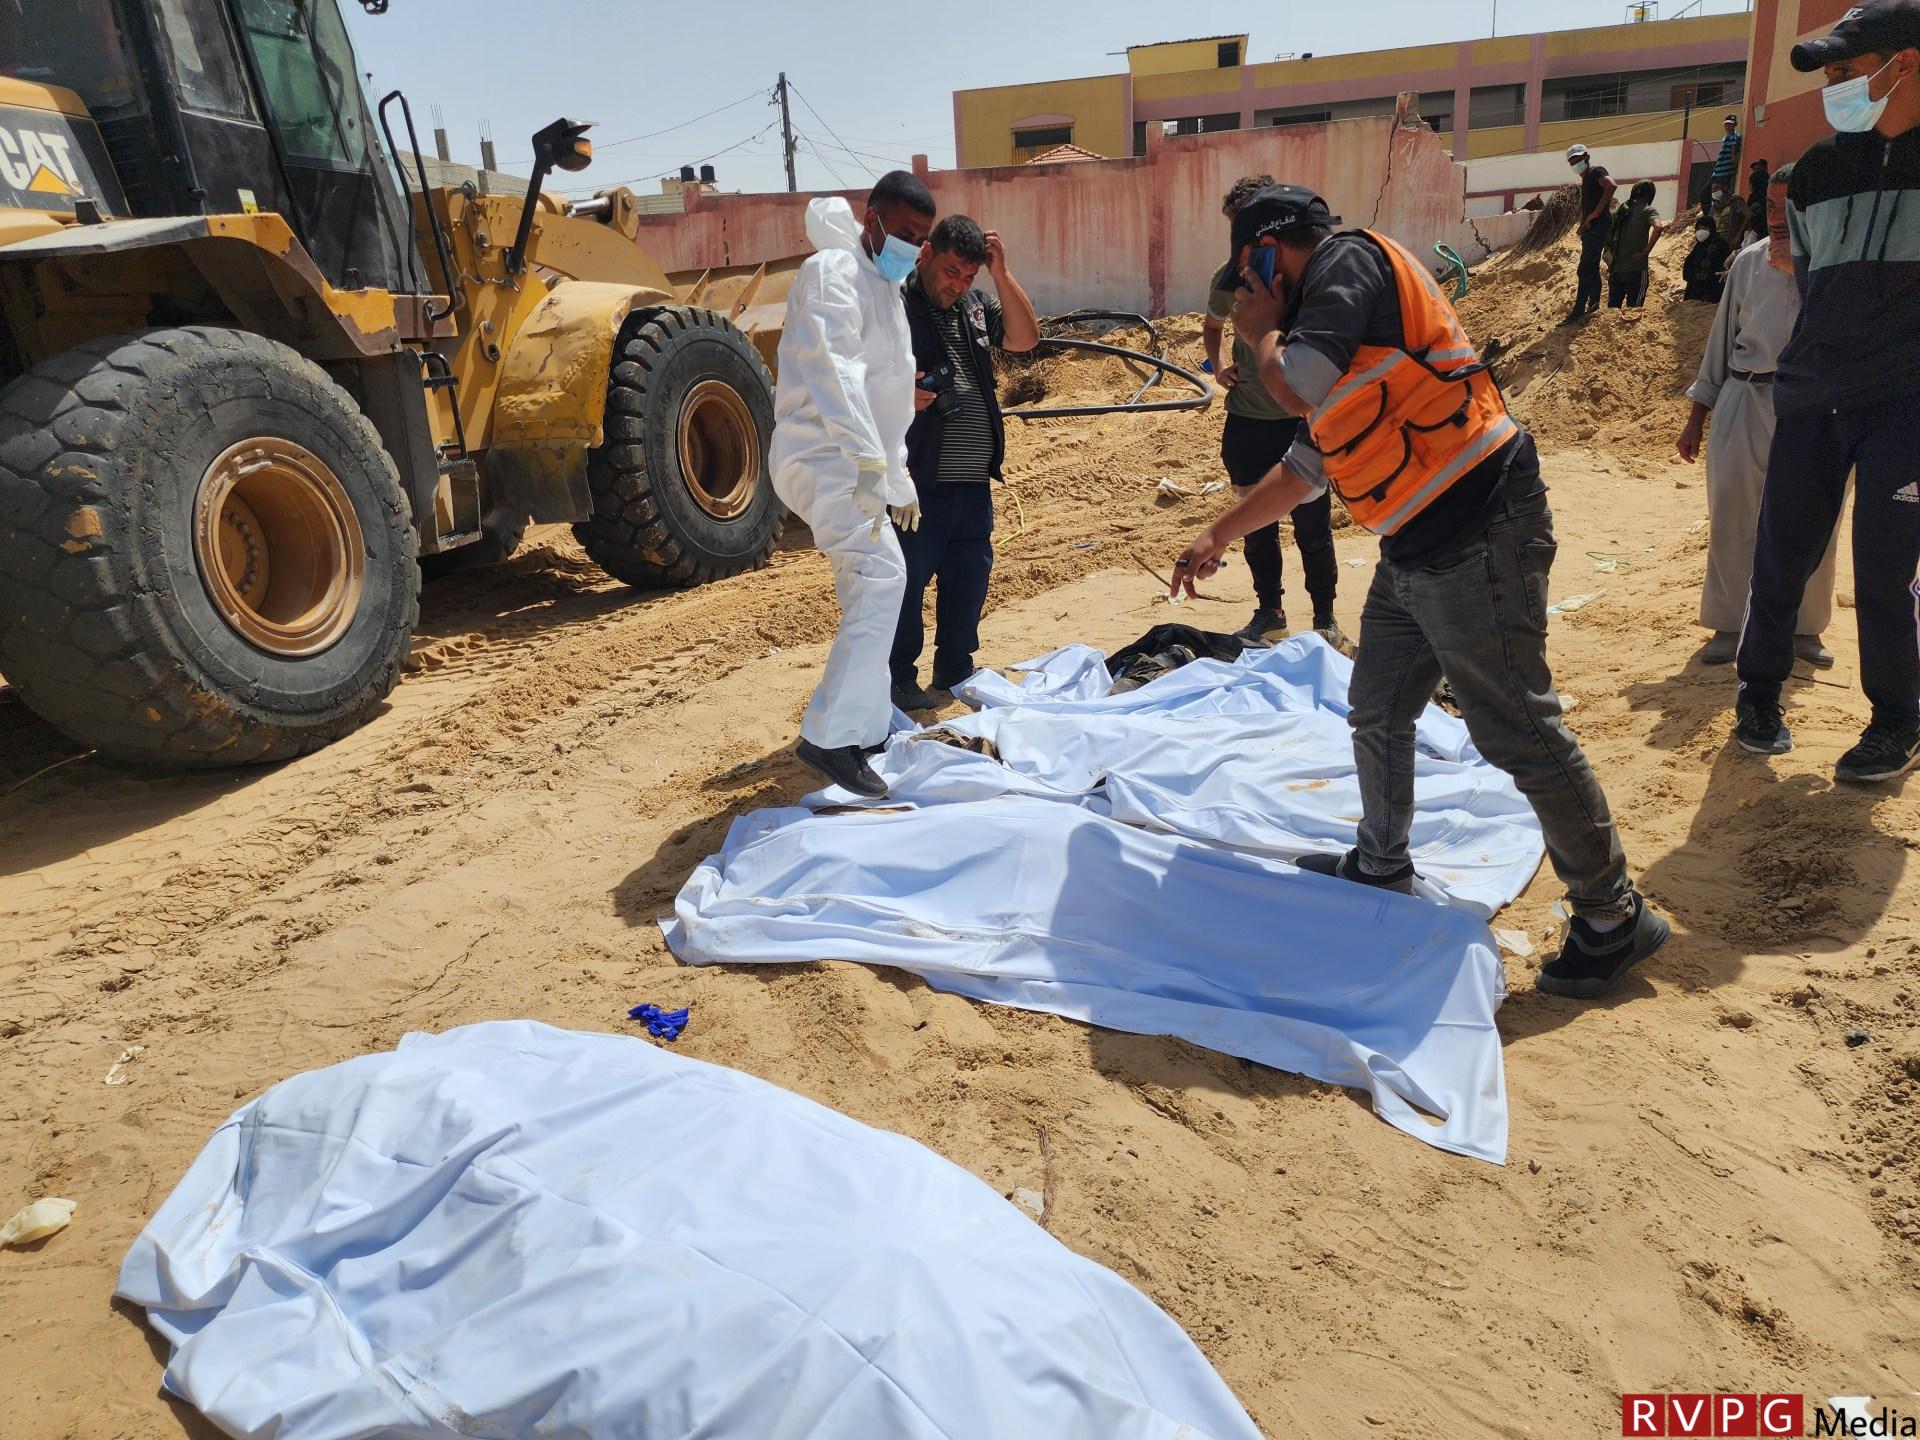 Evidence of torture as nearly 400 bodies found in mass graves in Gaza